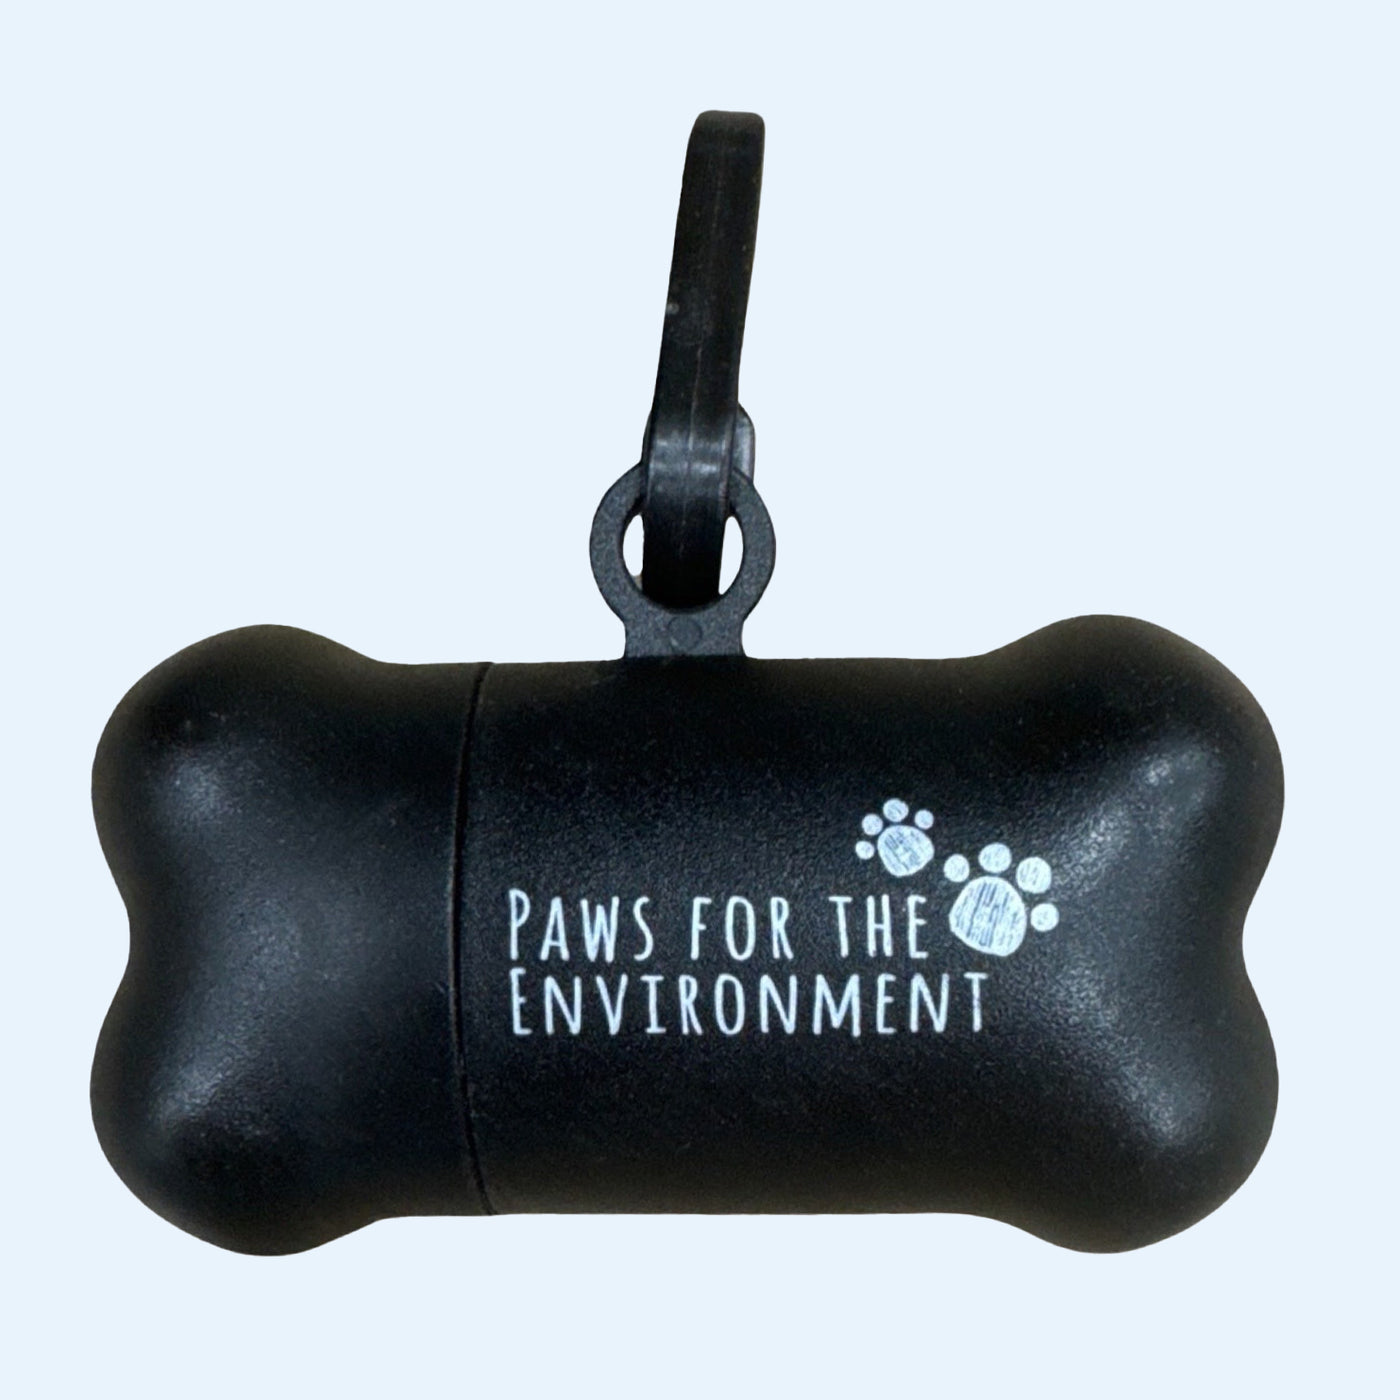 Paws for the Environment Bone-Shaped Pet Poop Bag 20 pack